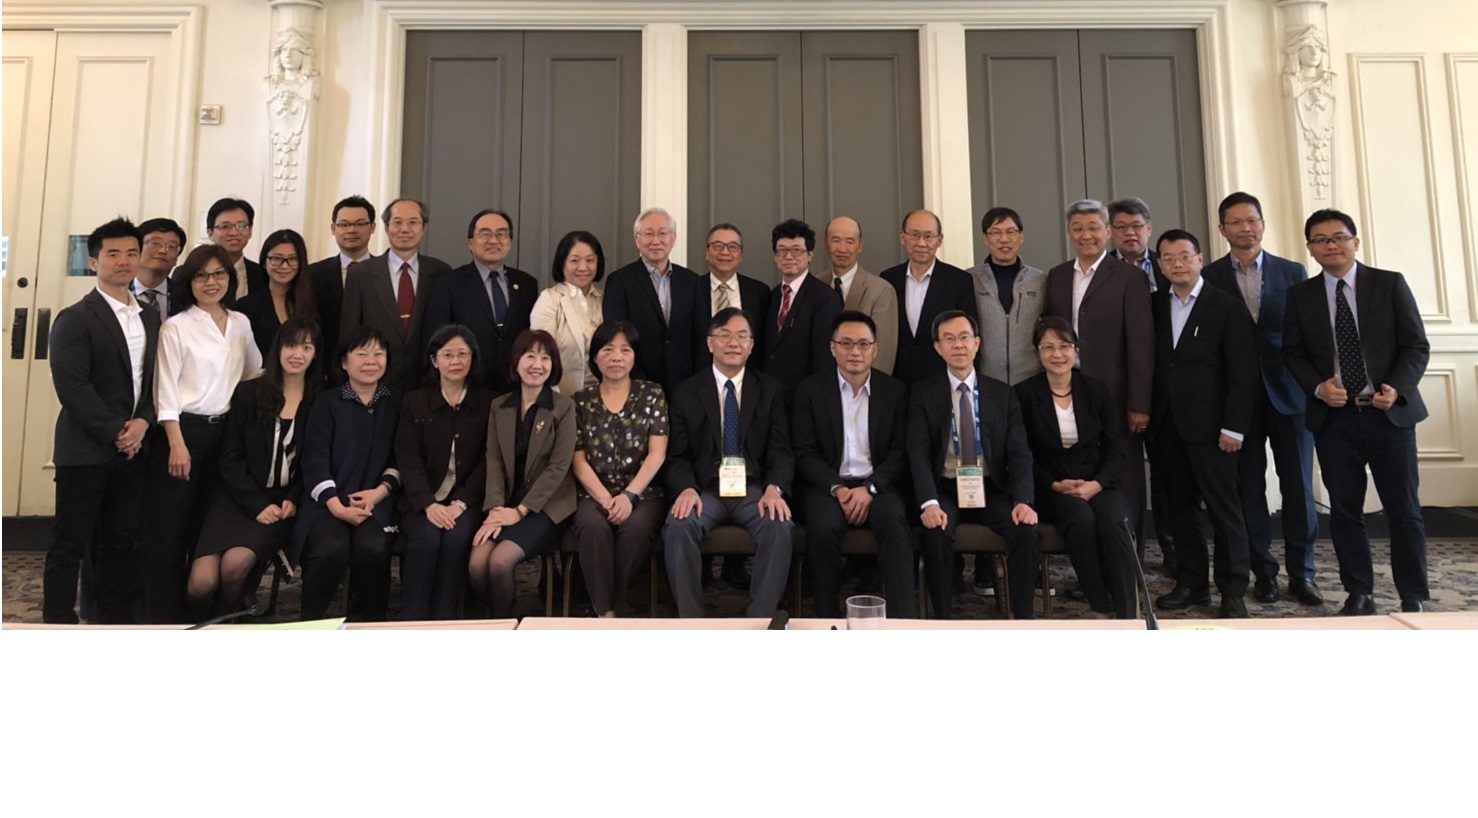 Taiwan’s biomedical made a long-lasting impression at the world stage and the trip ends with a productive oversea Bio Taiwan Committee (BTC) meeting